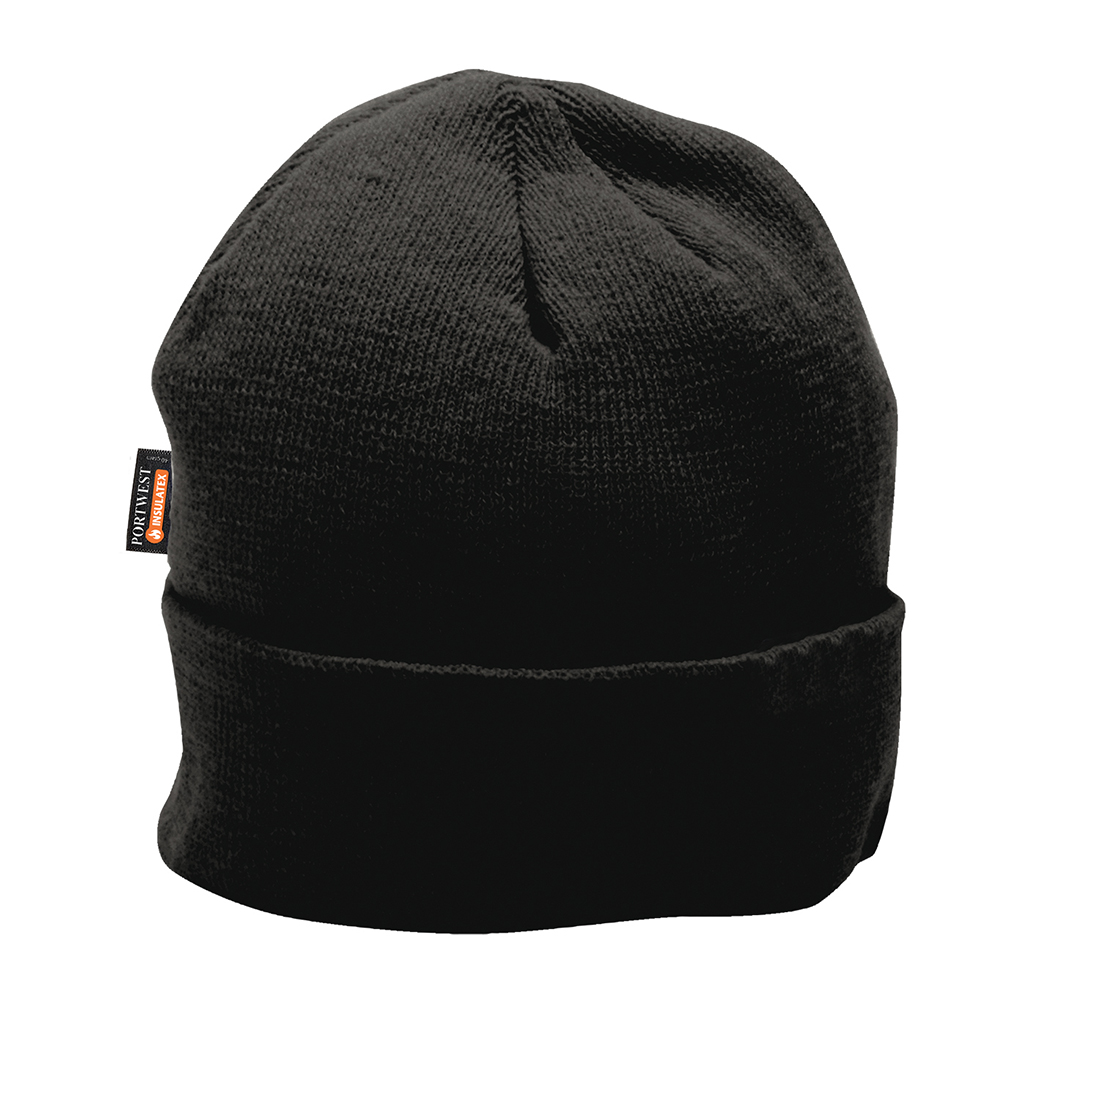 Portwest B013 - Knit Hat Insulatex Lined